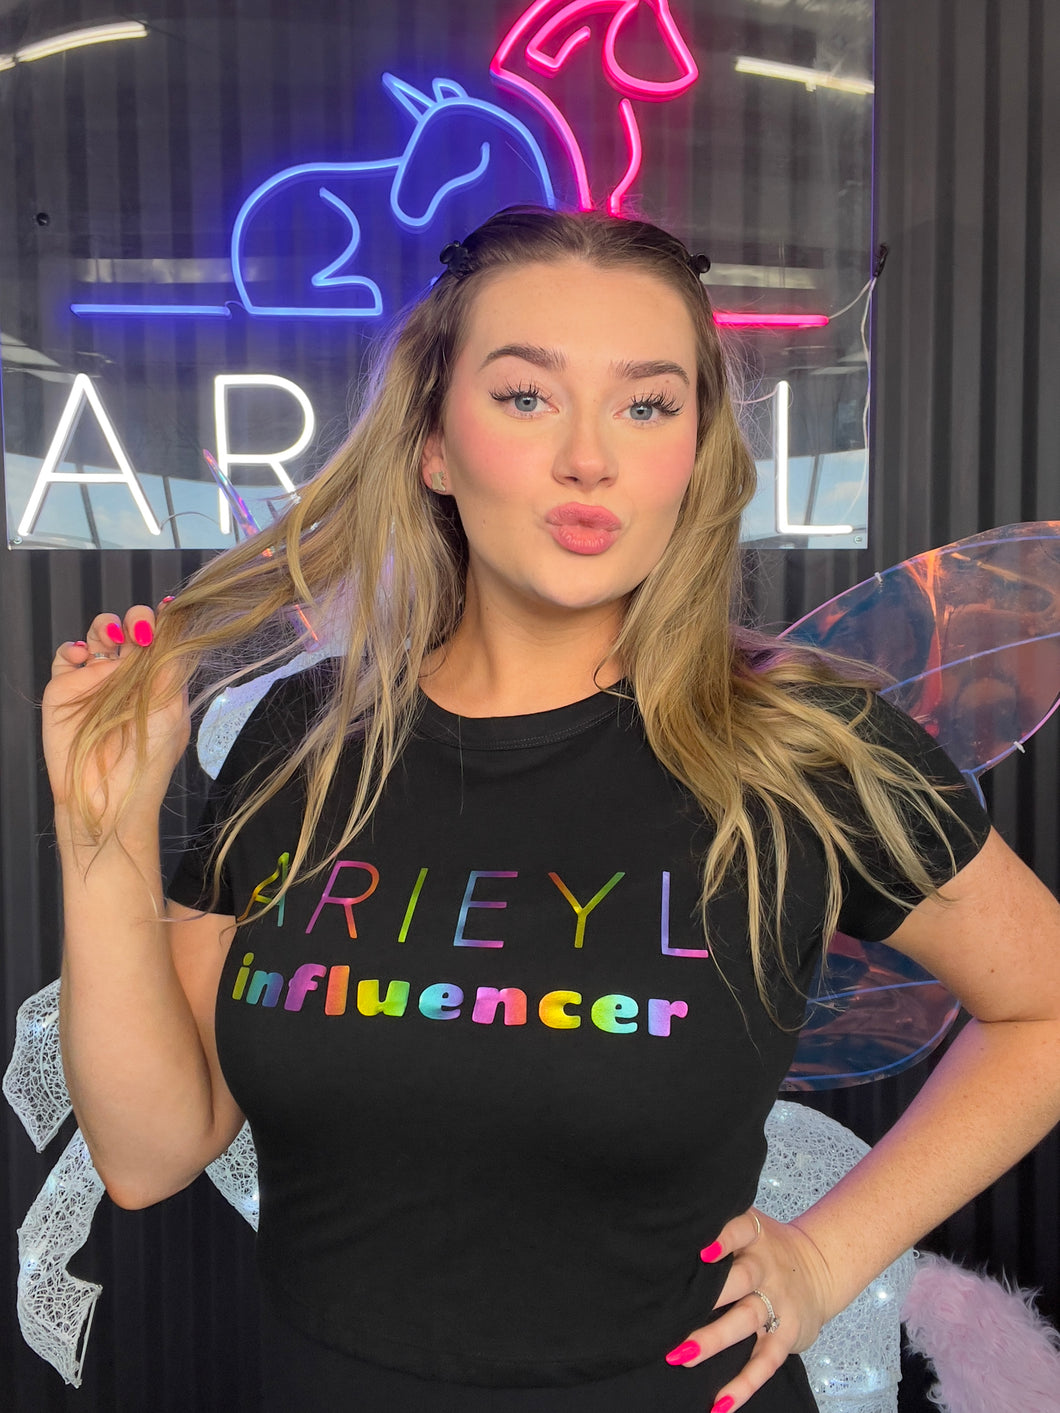 Arieyl Influencer Cropped Tee